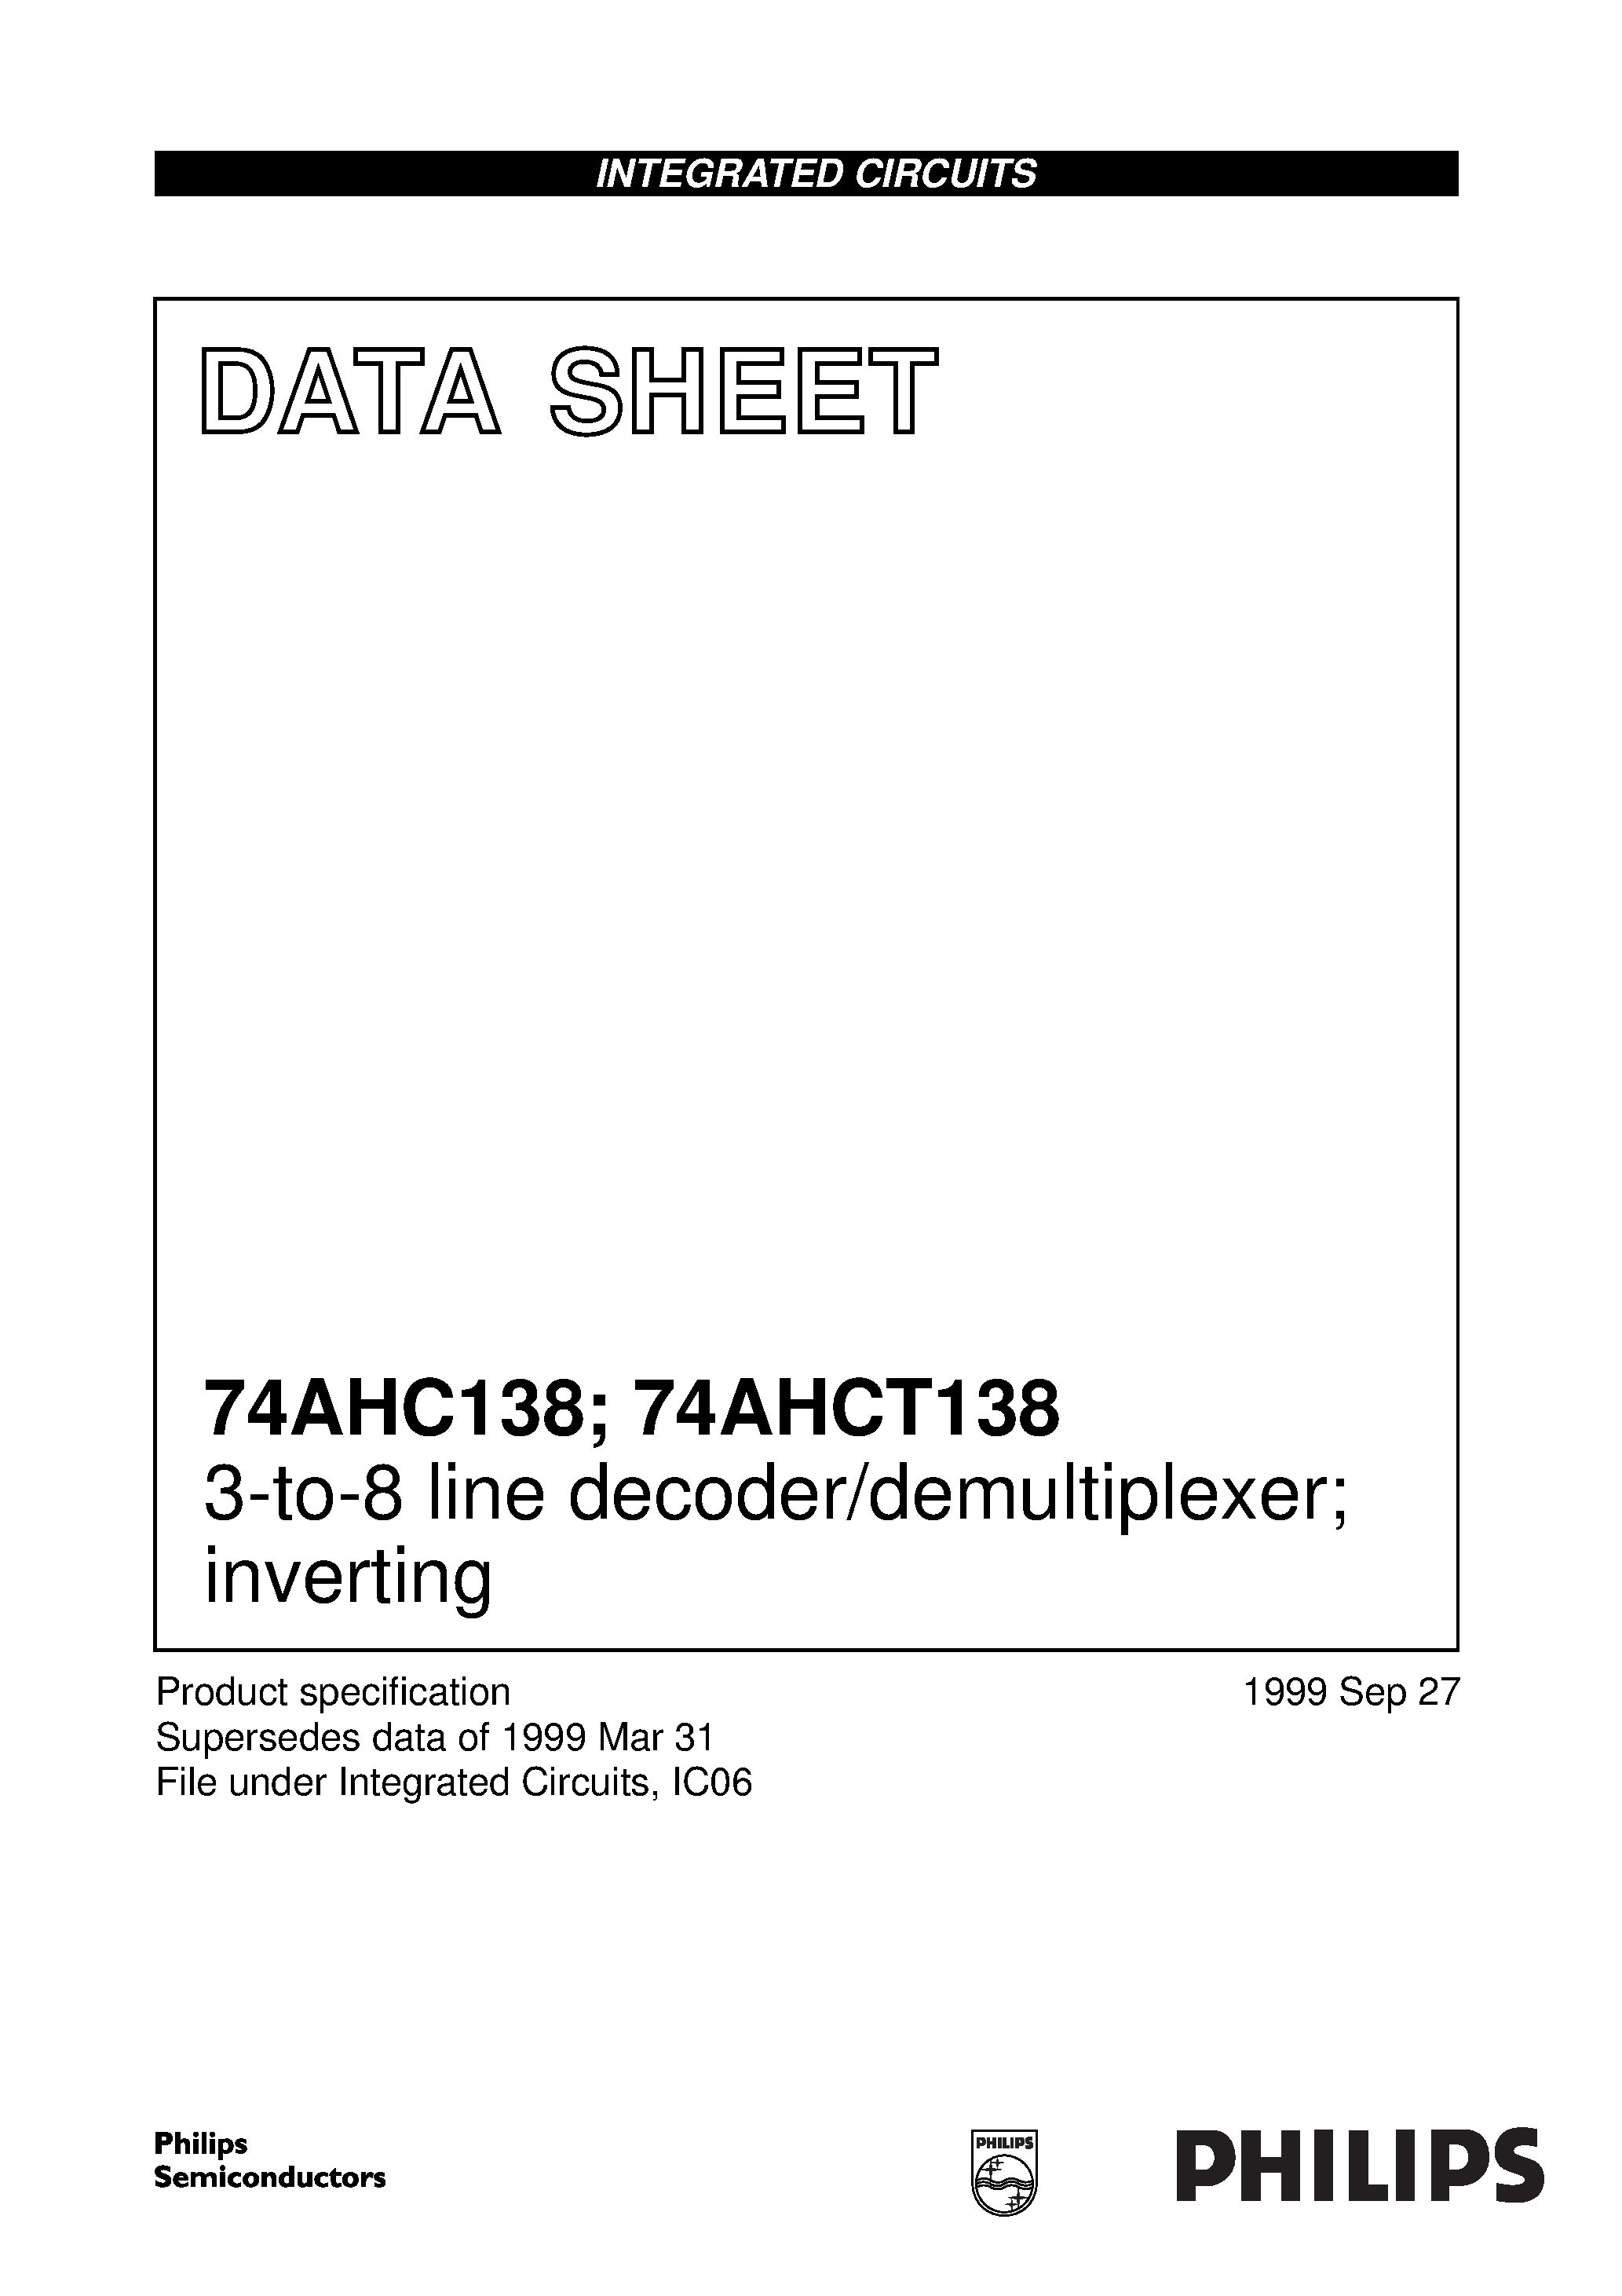 Datasheet 74AHC138PWDH - 3-to-8 line decoder/demultiplexer; inverting page 1